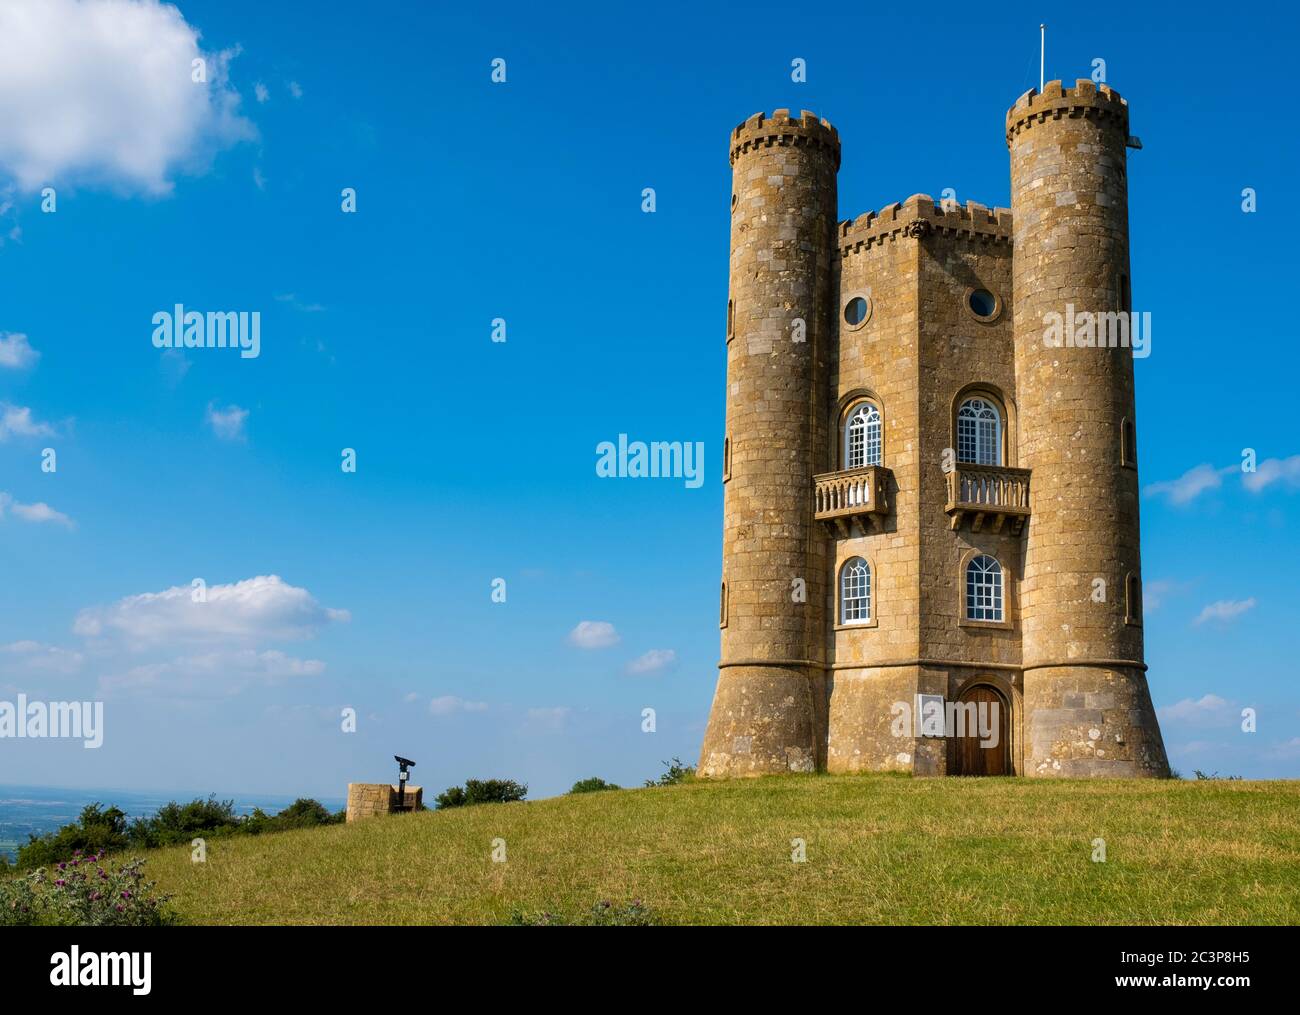 Broadway Tower is a famous landmark in The Cotswolds. Stock Photo